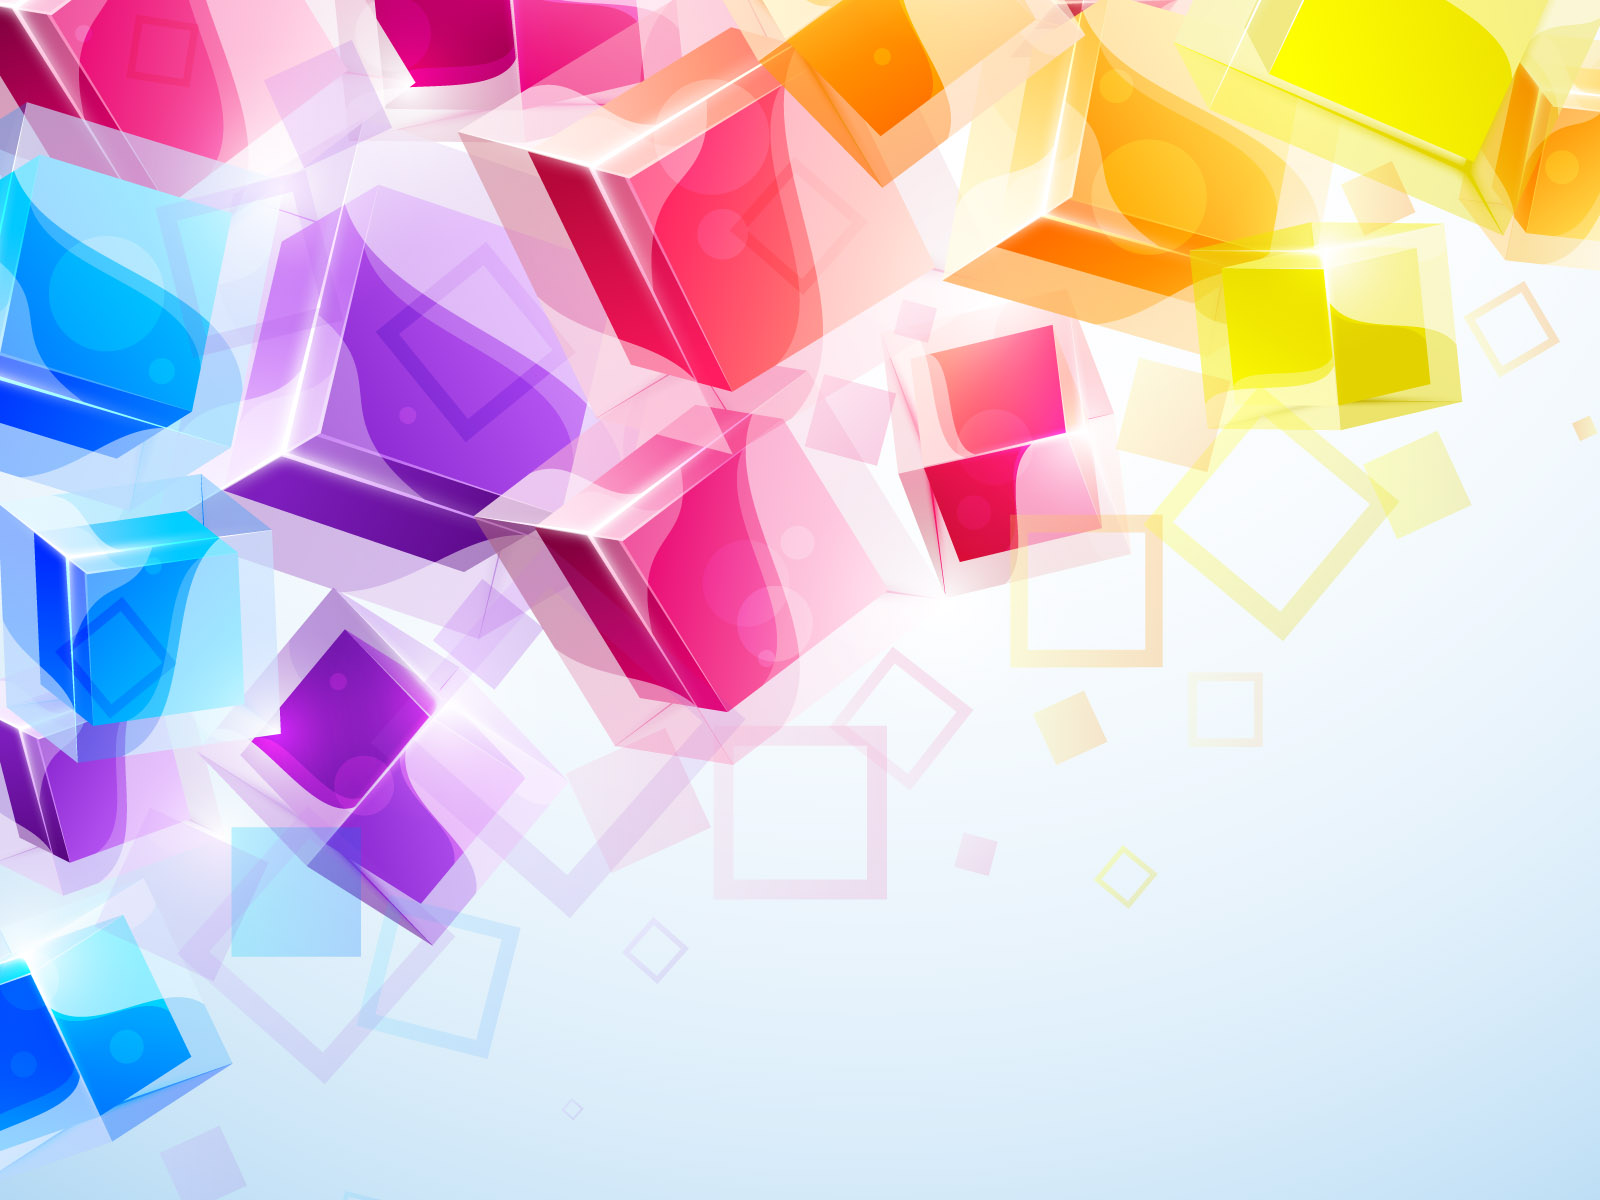 3D Business Colorful Square backgrounds